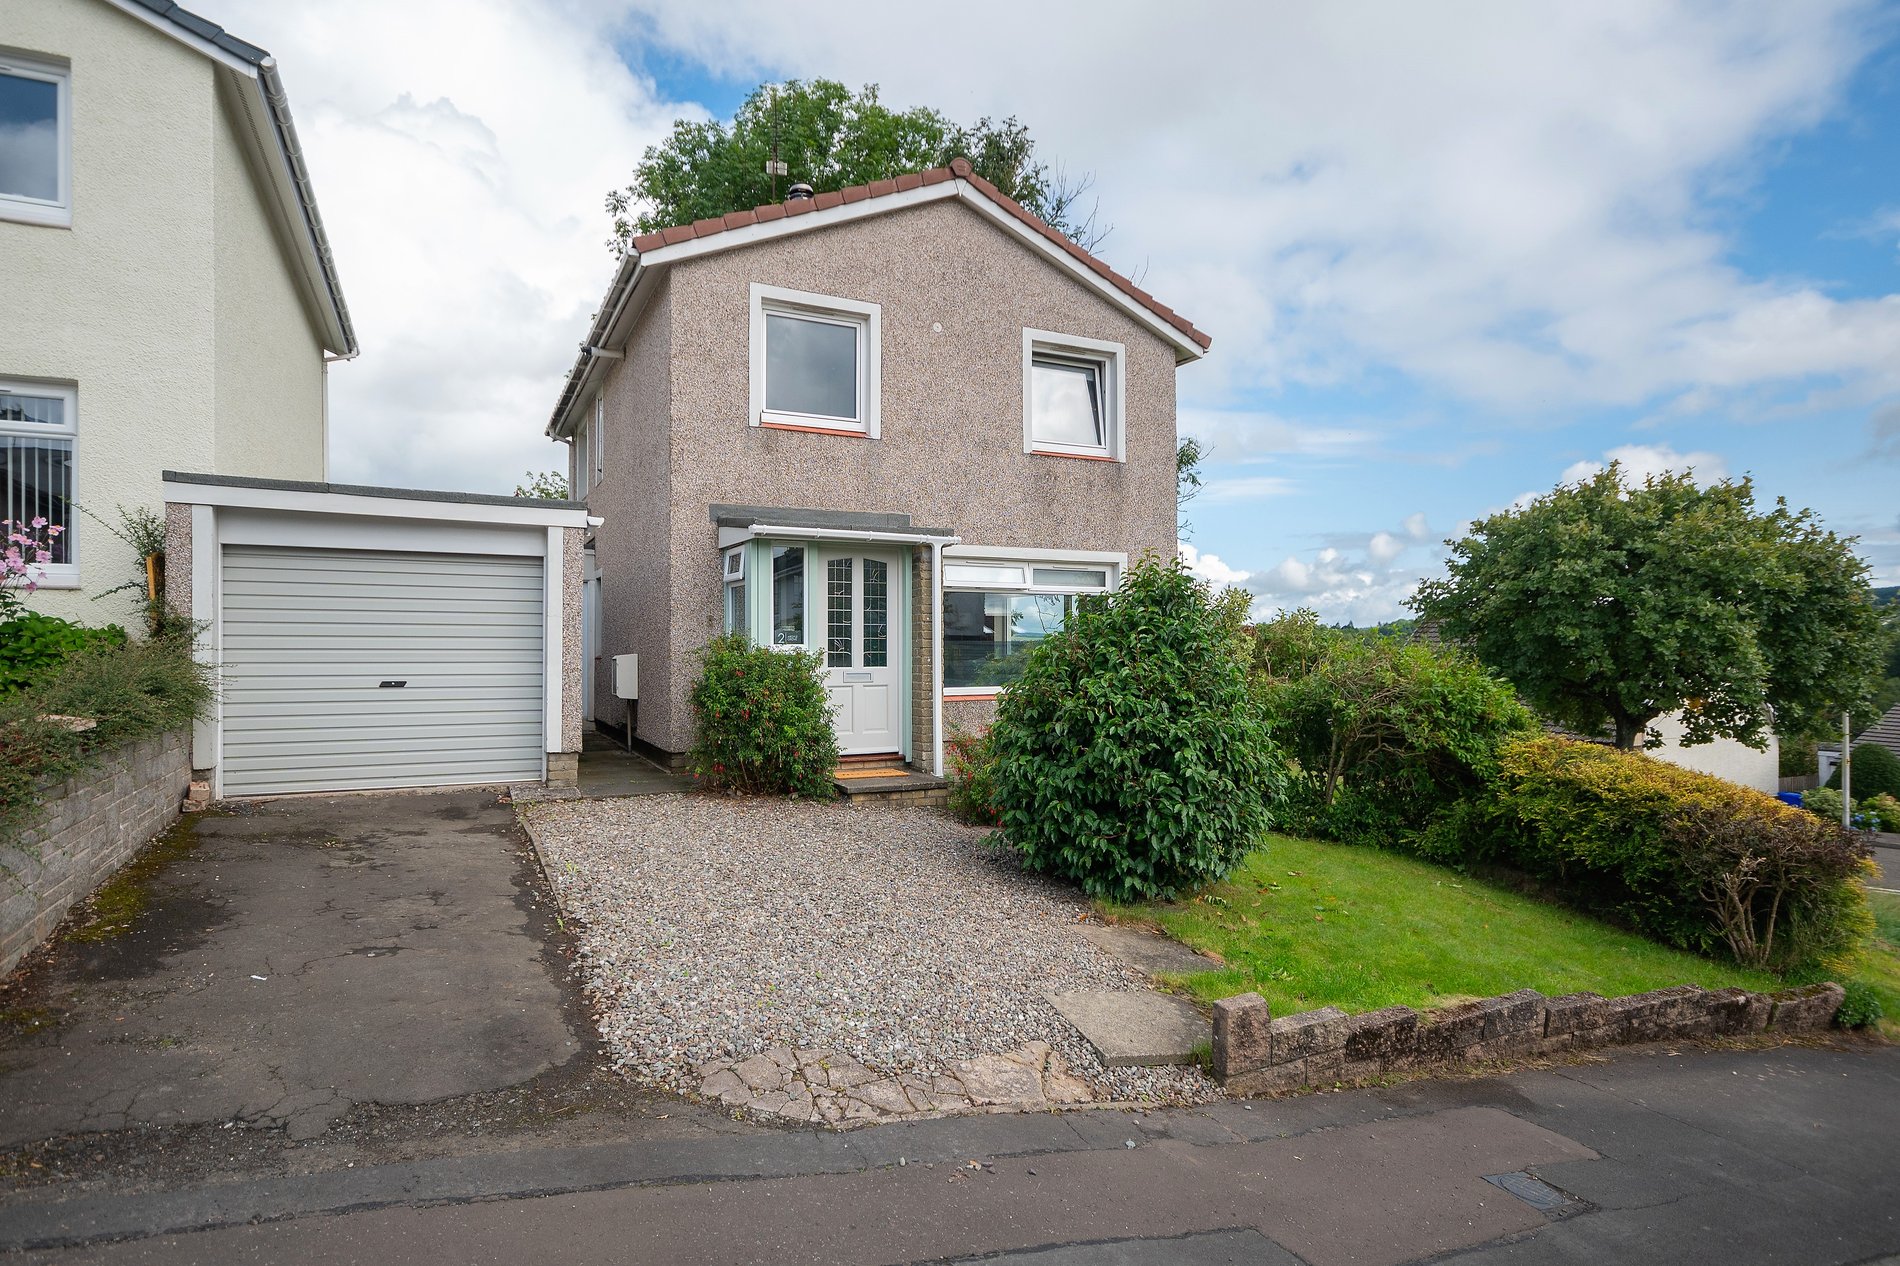 3 bed detached house for sale in Argyle Grove, Dunblane - Property Image 1